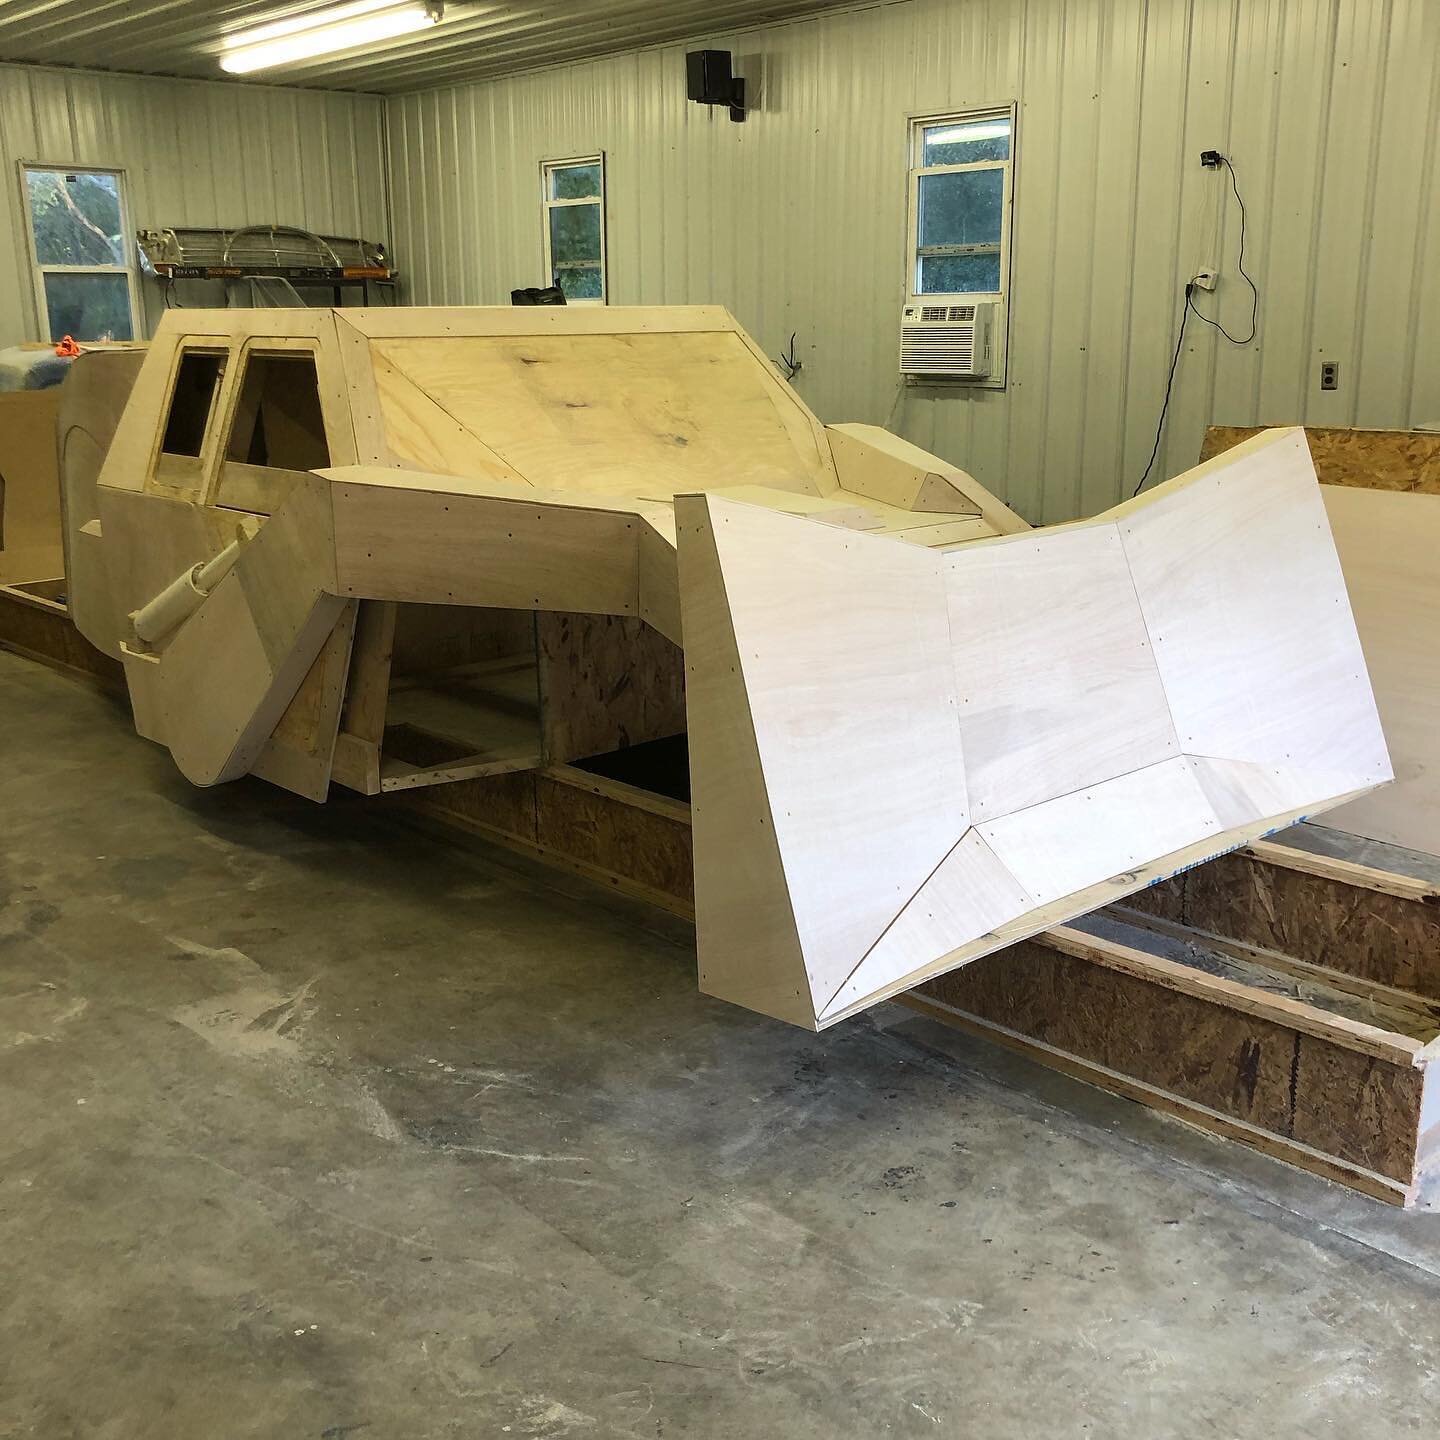 After all the main woodwork was done and the truck looked the way we wanted it to, the entire thing was covered in 1/4&rdquo; luan plywood. This served two purposes. One was to make the final finish way more smooth than regular construction grade ply